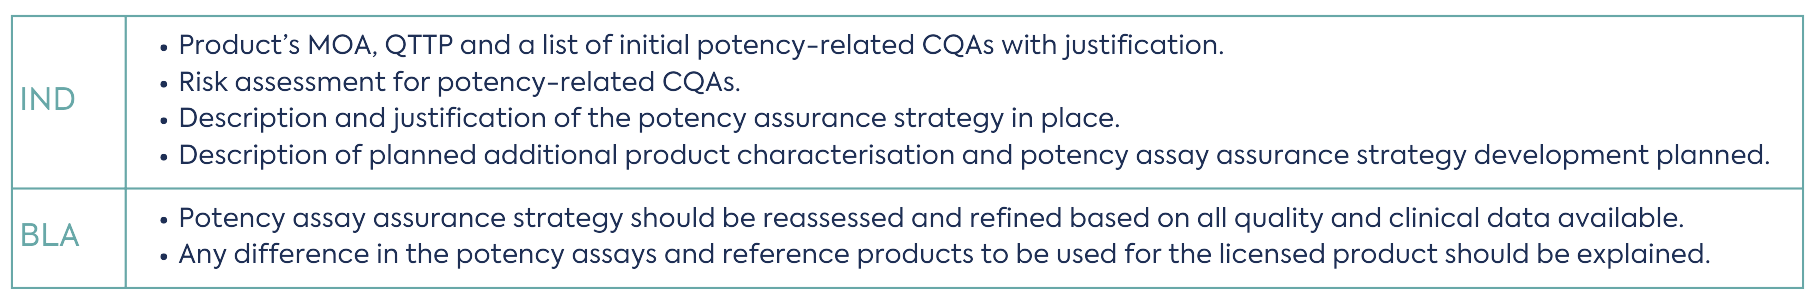 FDA Potency guideline, change in regulatory filing IND - Product’s MOA, QTTP and a list of initial potency-related CQAs with justification. - Risk assessment for potency-related CQAs. - Description and justification of the potency assurance strategy in place. - Description of planned additional product characterisation and potency assay assurance strategy development planned. BLA - Potency assay assurance strategy should be reassessed and refined based on all quality and clinical data available. - Any difference in the potency assays and reference products to be used for the licensed product should be explained.